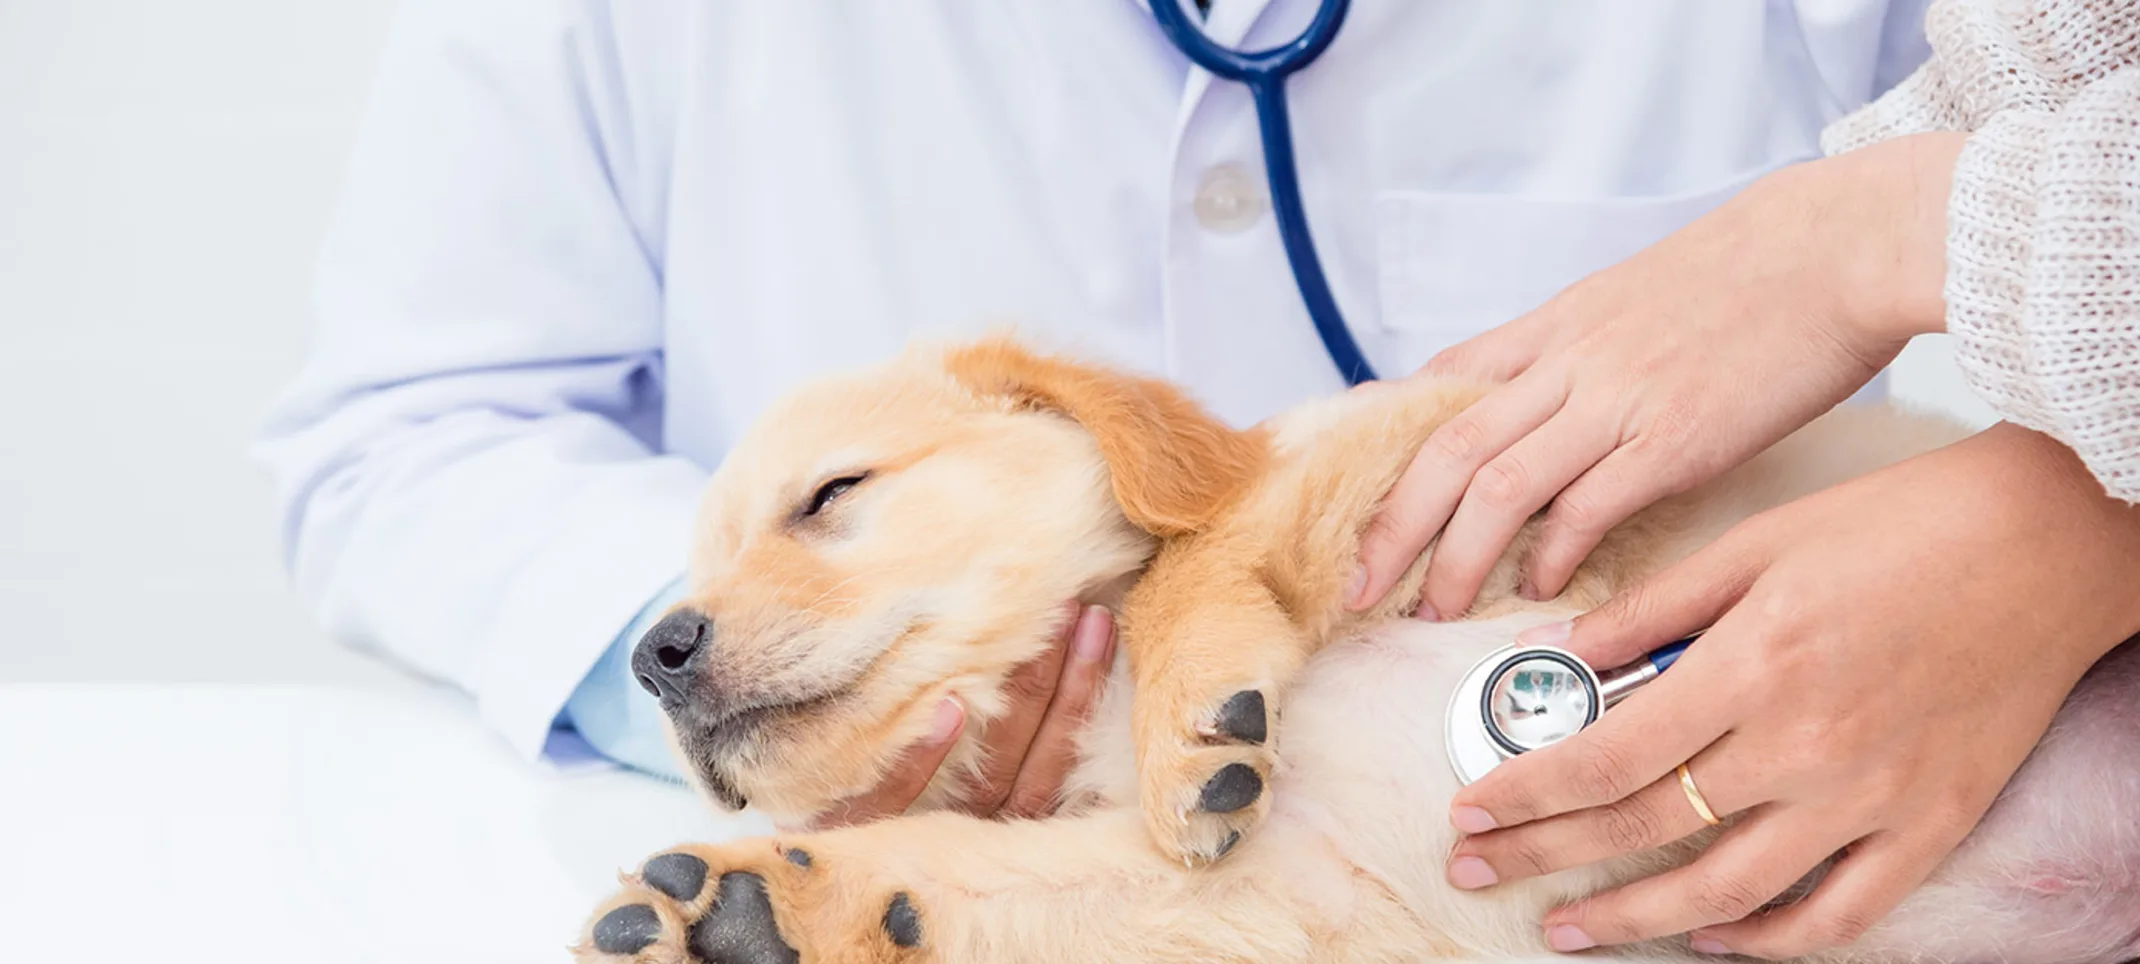 Puppy on examination table being examined with stethoscope